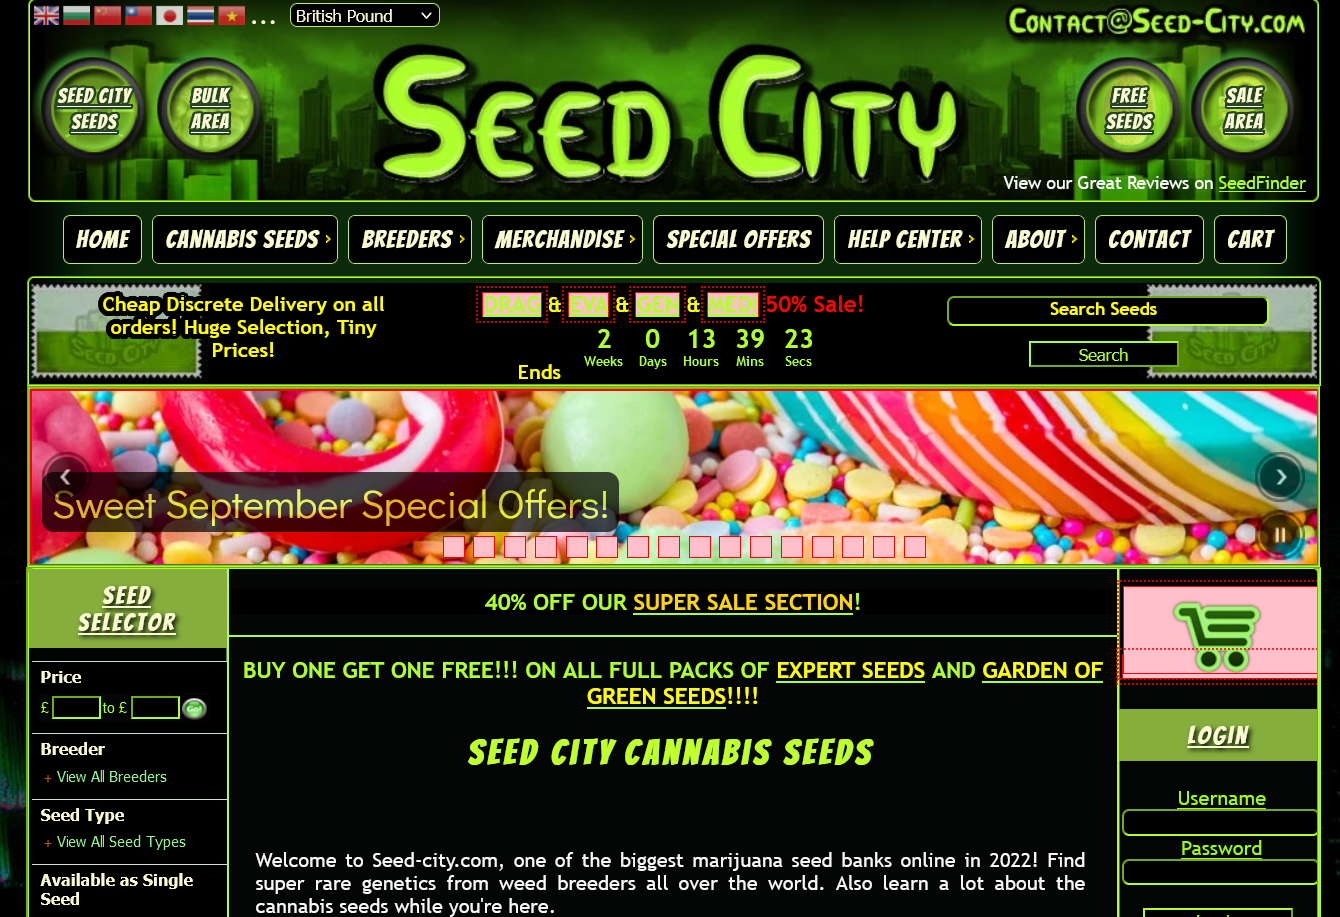 Best Cannabis Seed Banks to Buy Cannabis Seeds Online